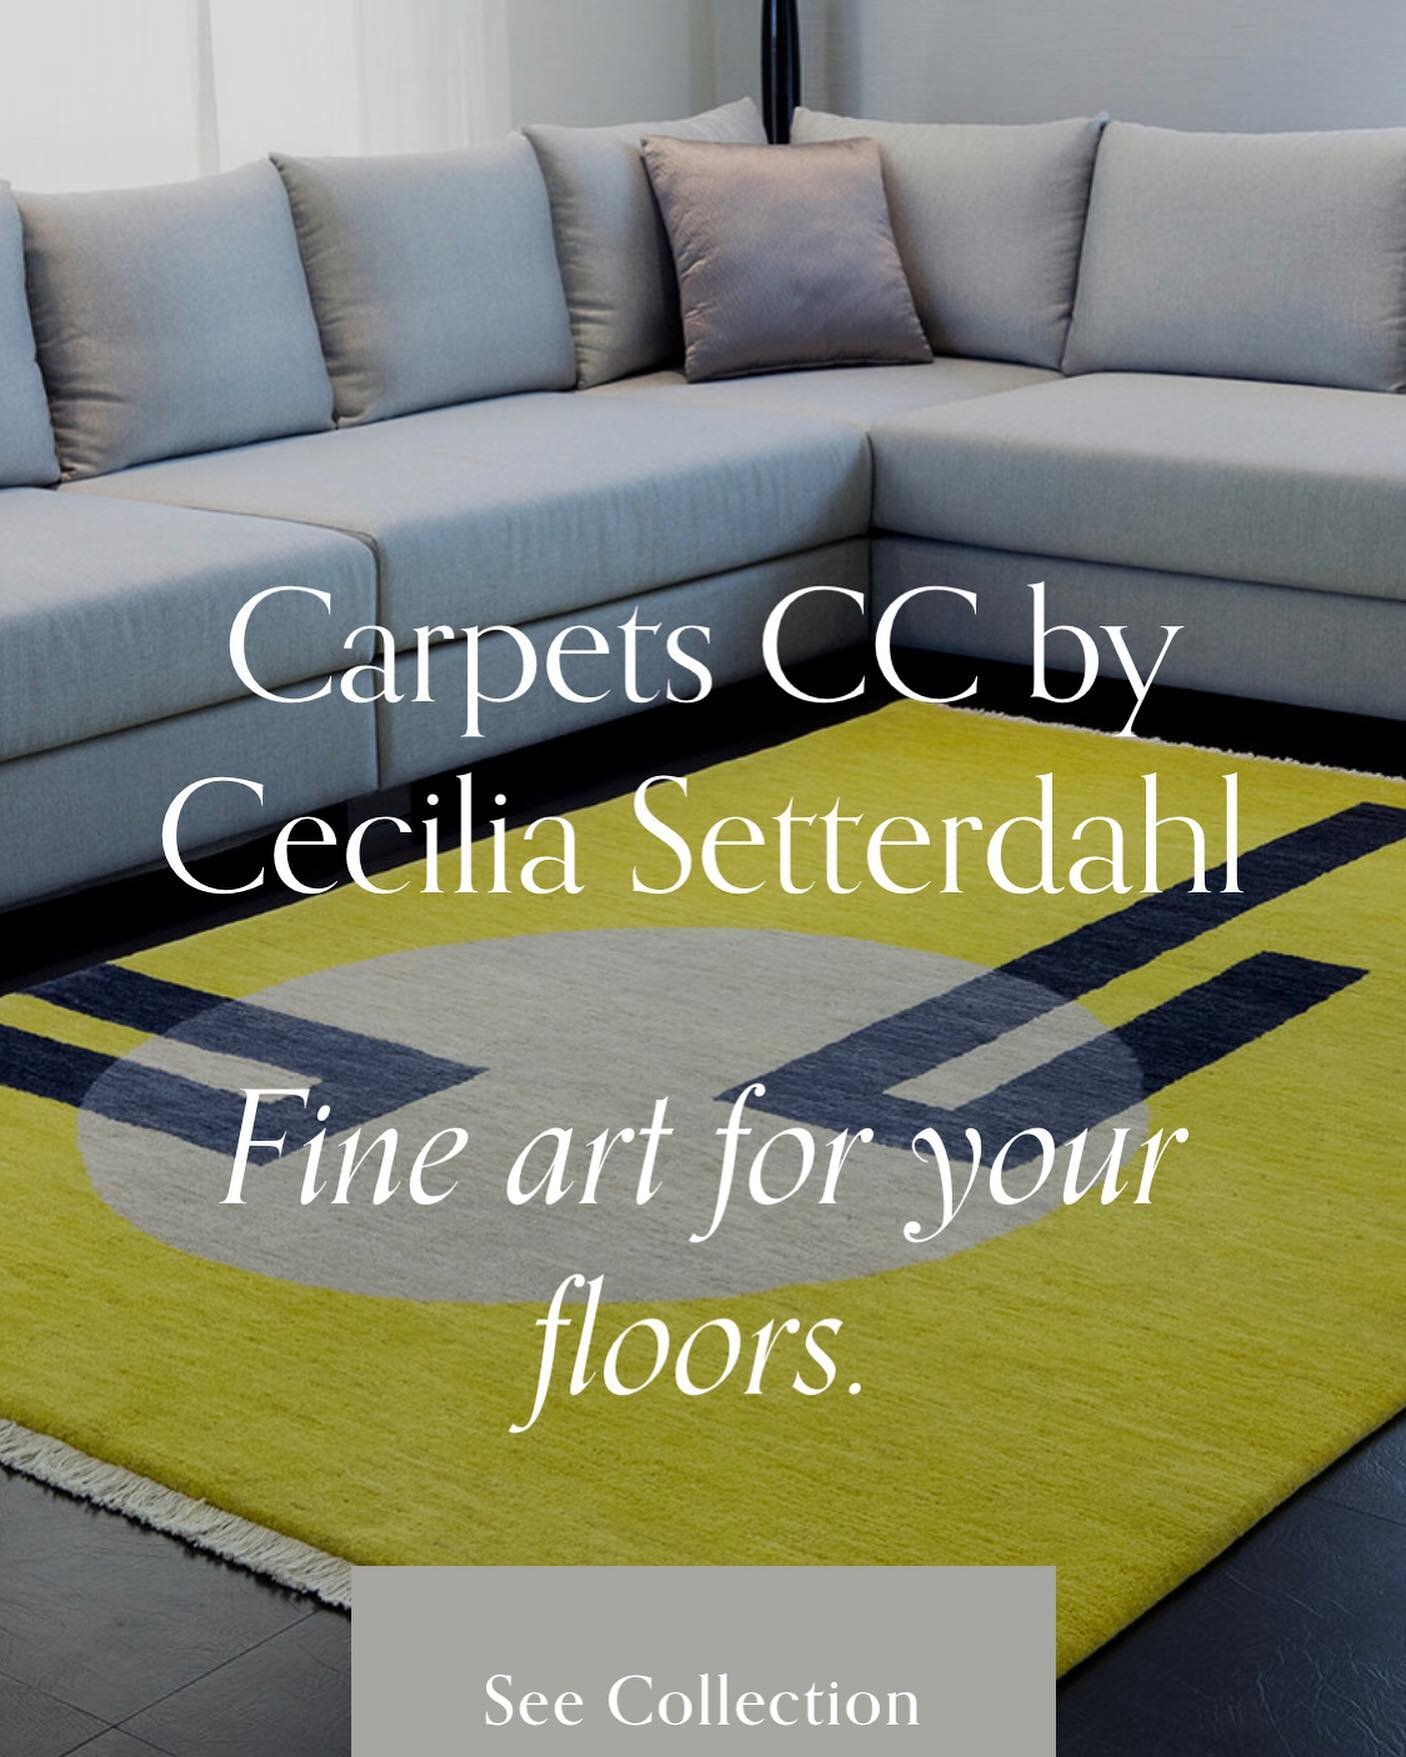 Forget painting walls, rolling out a new rug is the easiest way to transform a space&hellip;

Visit our website to see collection. Link in bio!

#geometricalrug #carpetdesign #moderncarpet #designerrugs #interior #interiordesignidea #fadedcolors #car